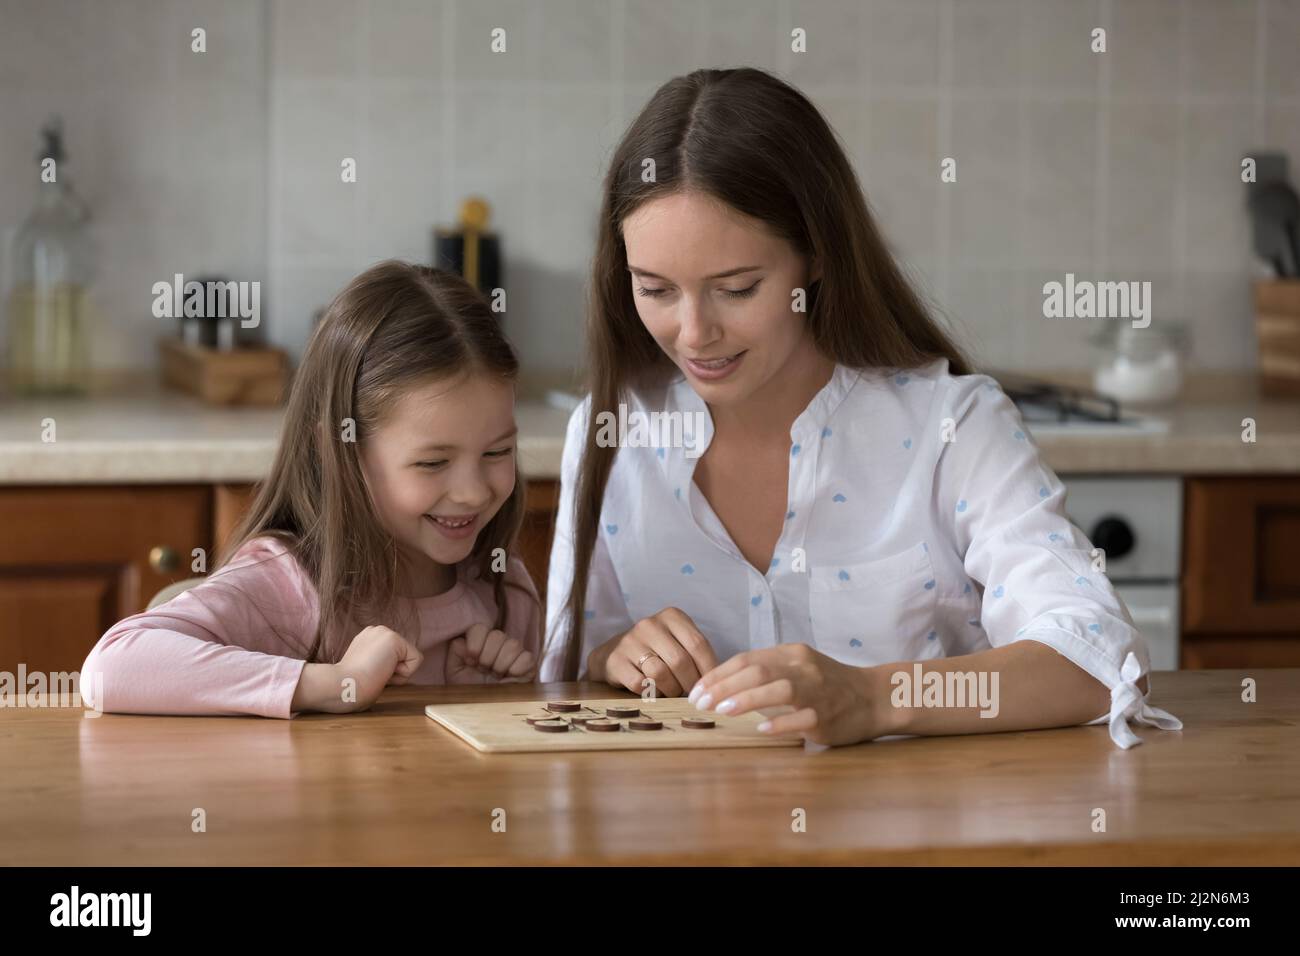 Happy mom and daughter girl engaged in learning board game Stock Photo